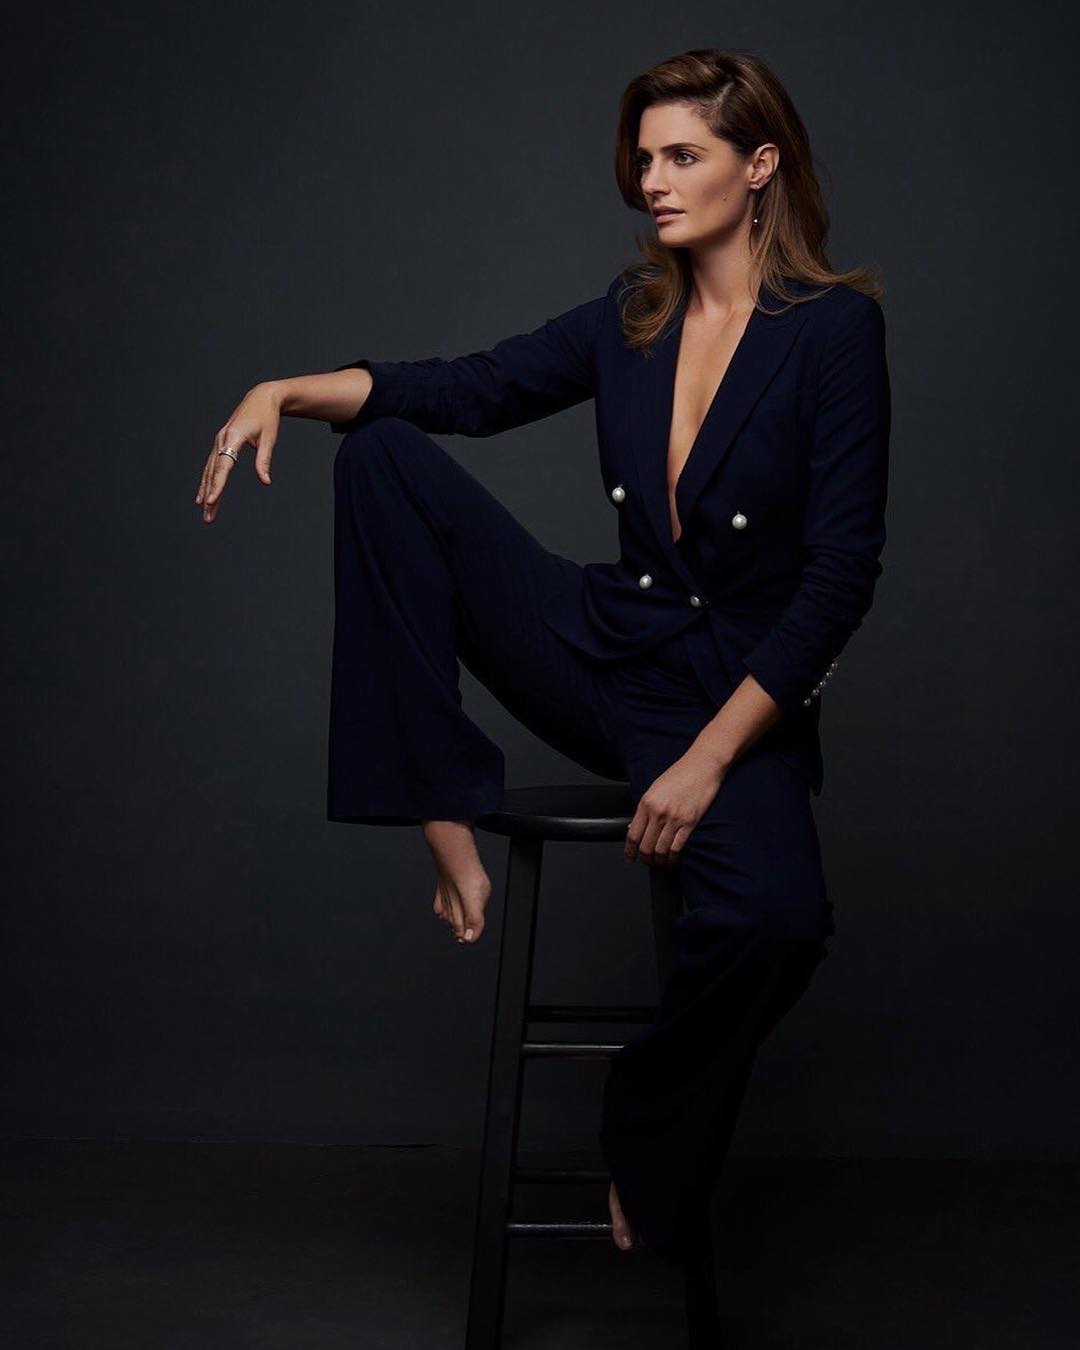 65+ Hottest Stana Katic Pictures Will Make You Want Her Now | Best Of Comic Books